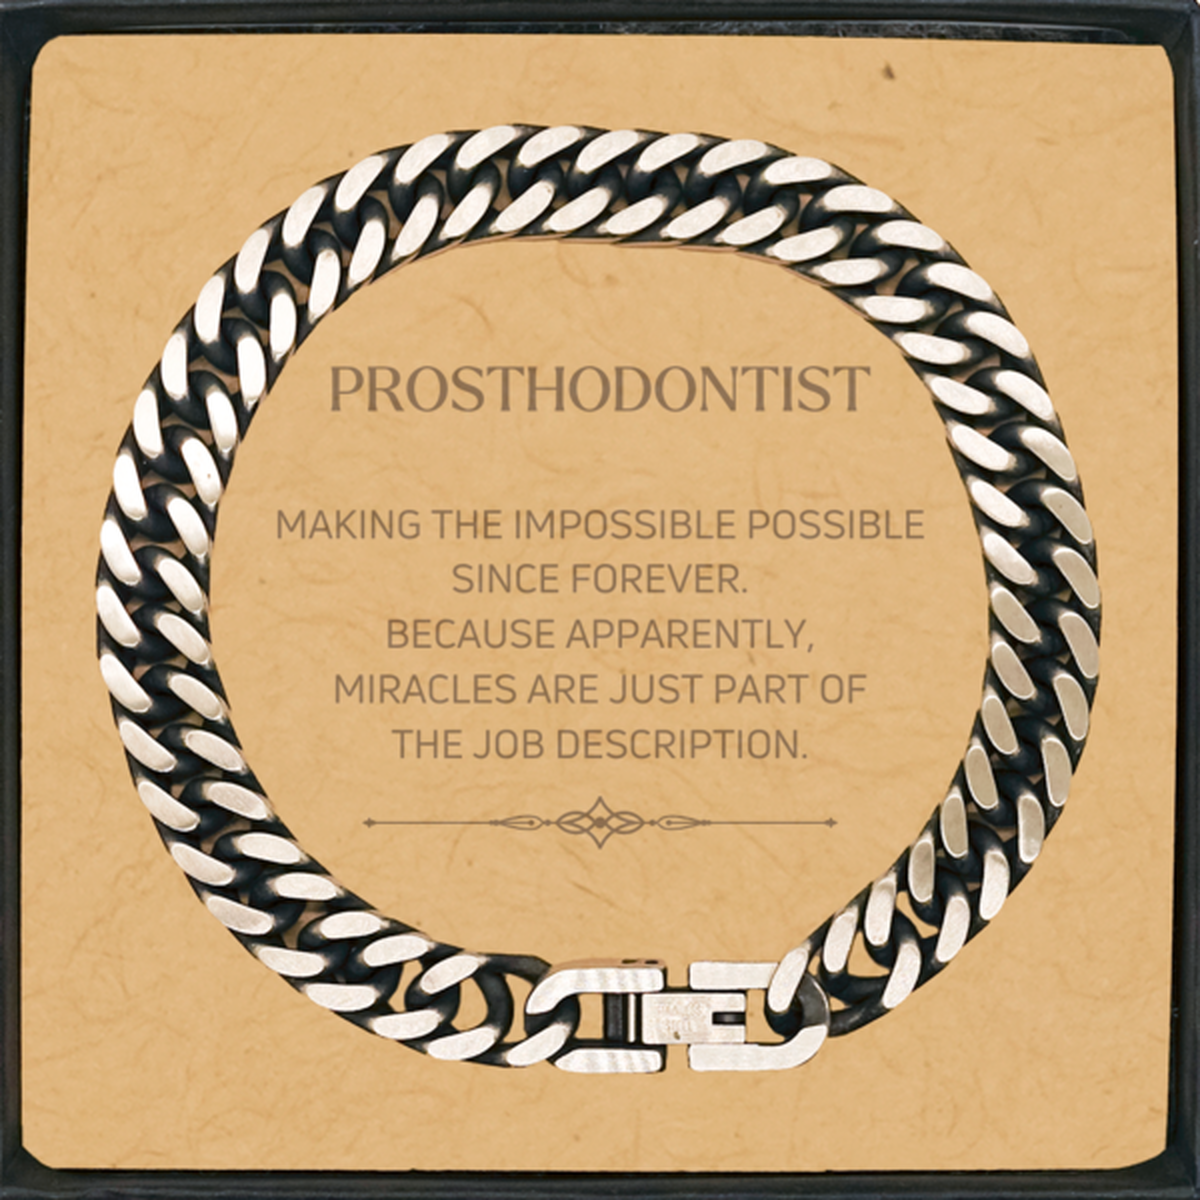 Funny Prosthodontist Gifts, Miracles are just part of the job description, Inspirational Birthday Cuban Link Chain Bracelet For Prosthodontist, Men, Women, Coworkers, Friends, Boss